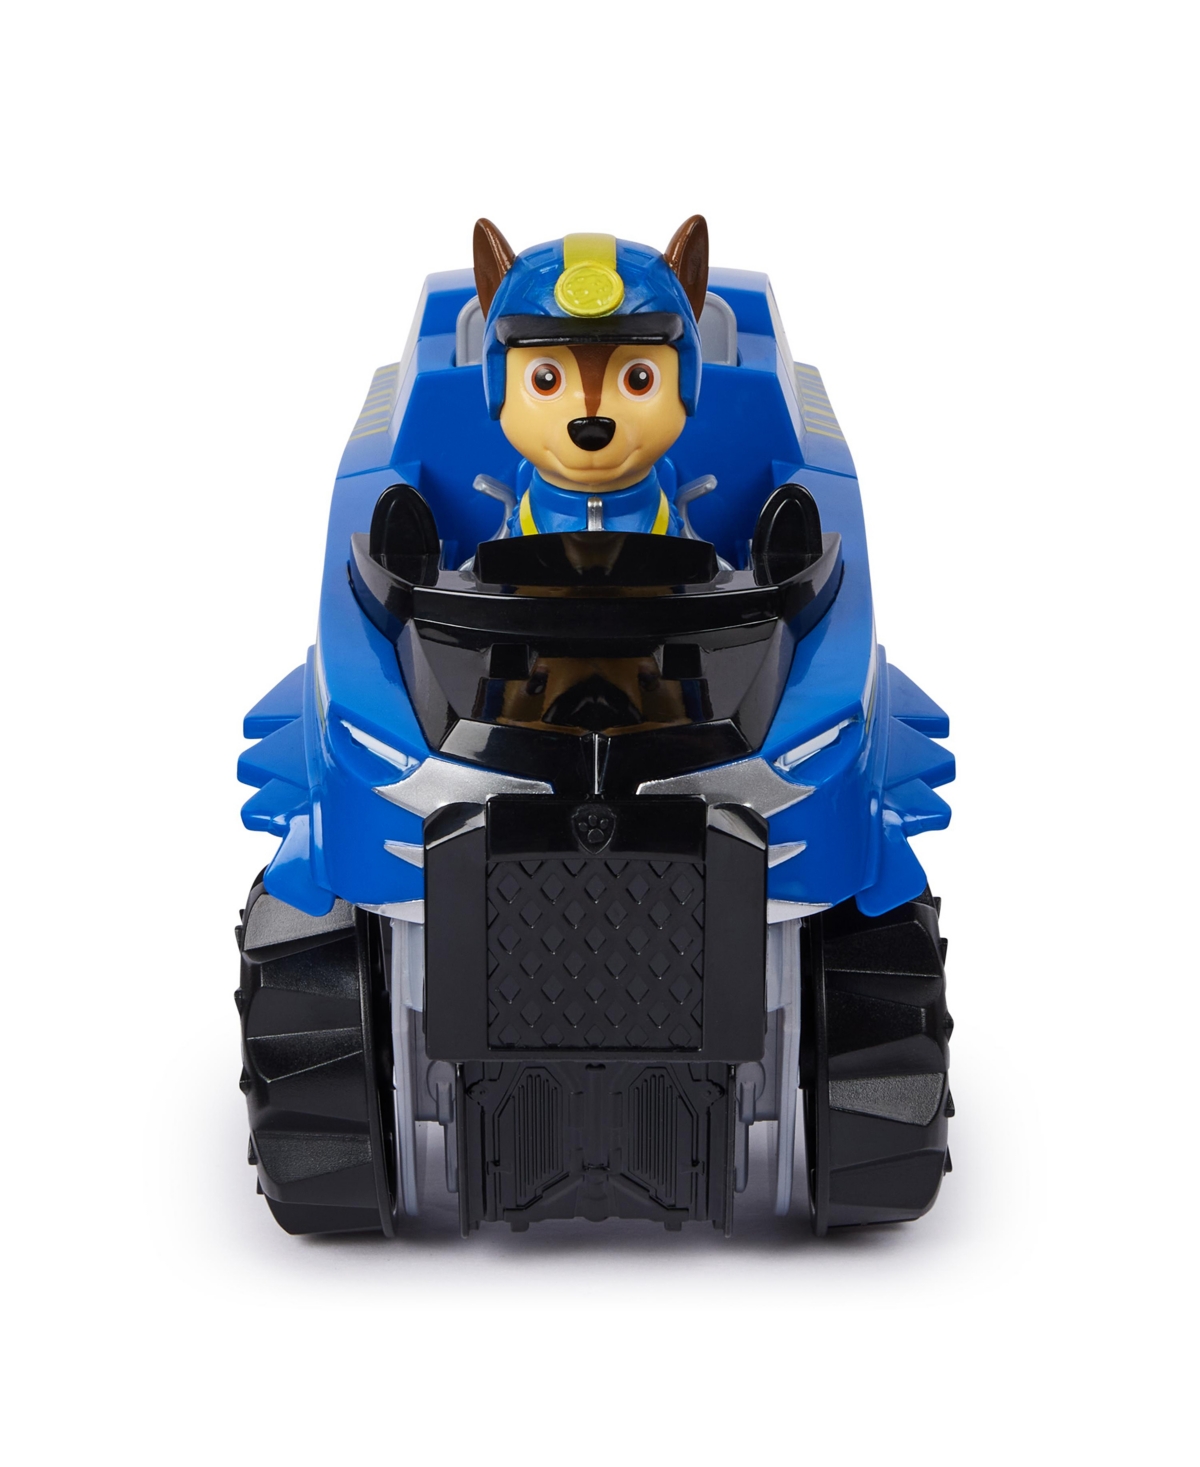 Shop Paw Patrol Jungle Pups, Chase Tiger Vehicle, Toy Truck With Collectible Action Figure In Multi-color